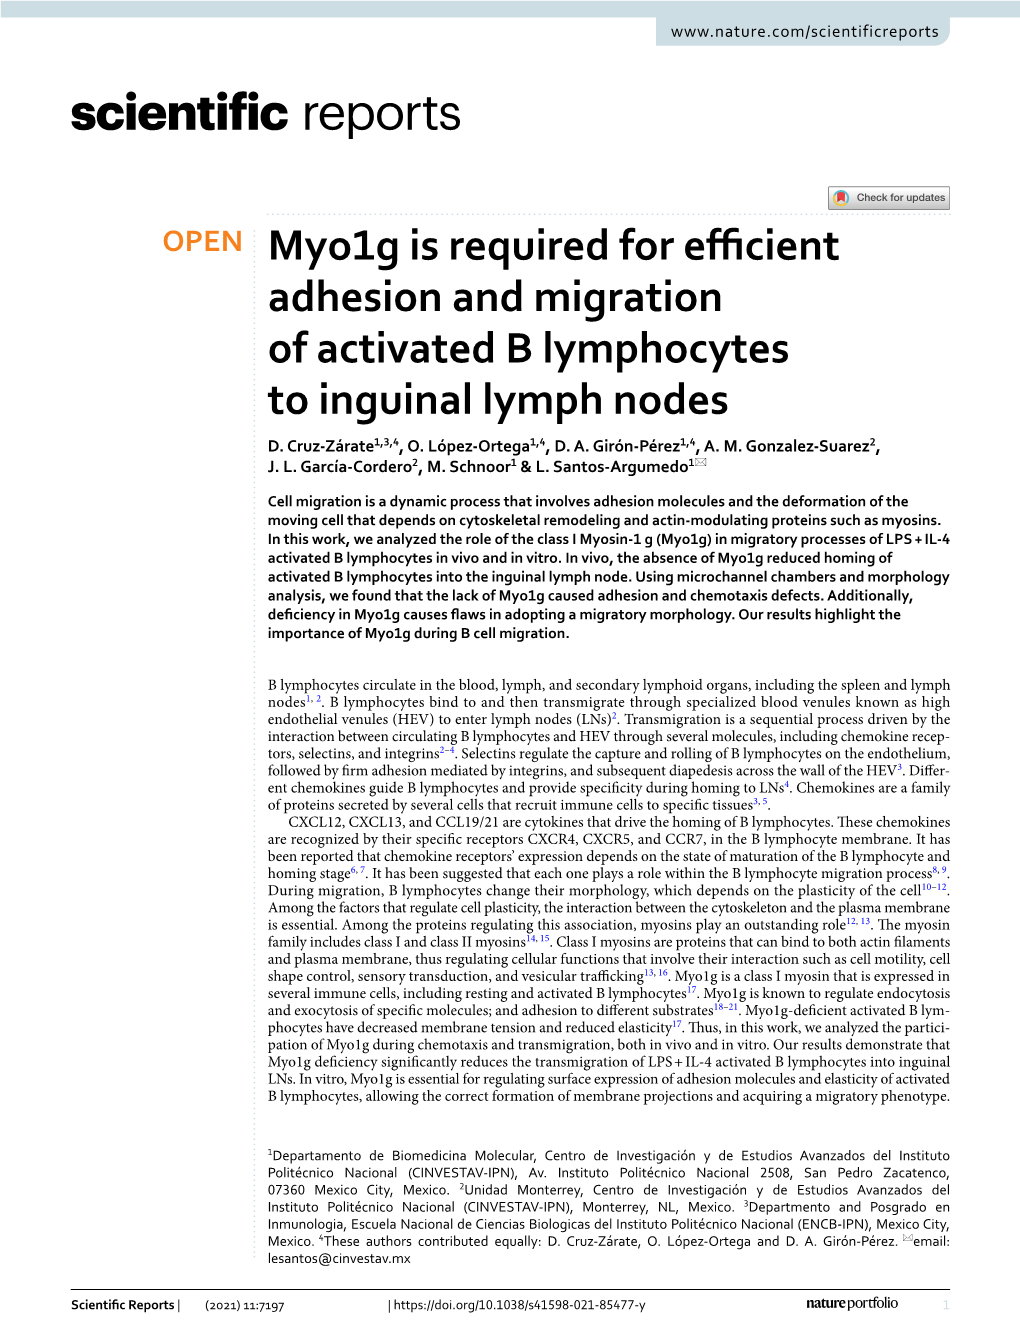 Myo1g Is Required for Efficient Adhesion and Migration of Activated